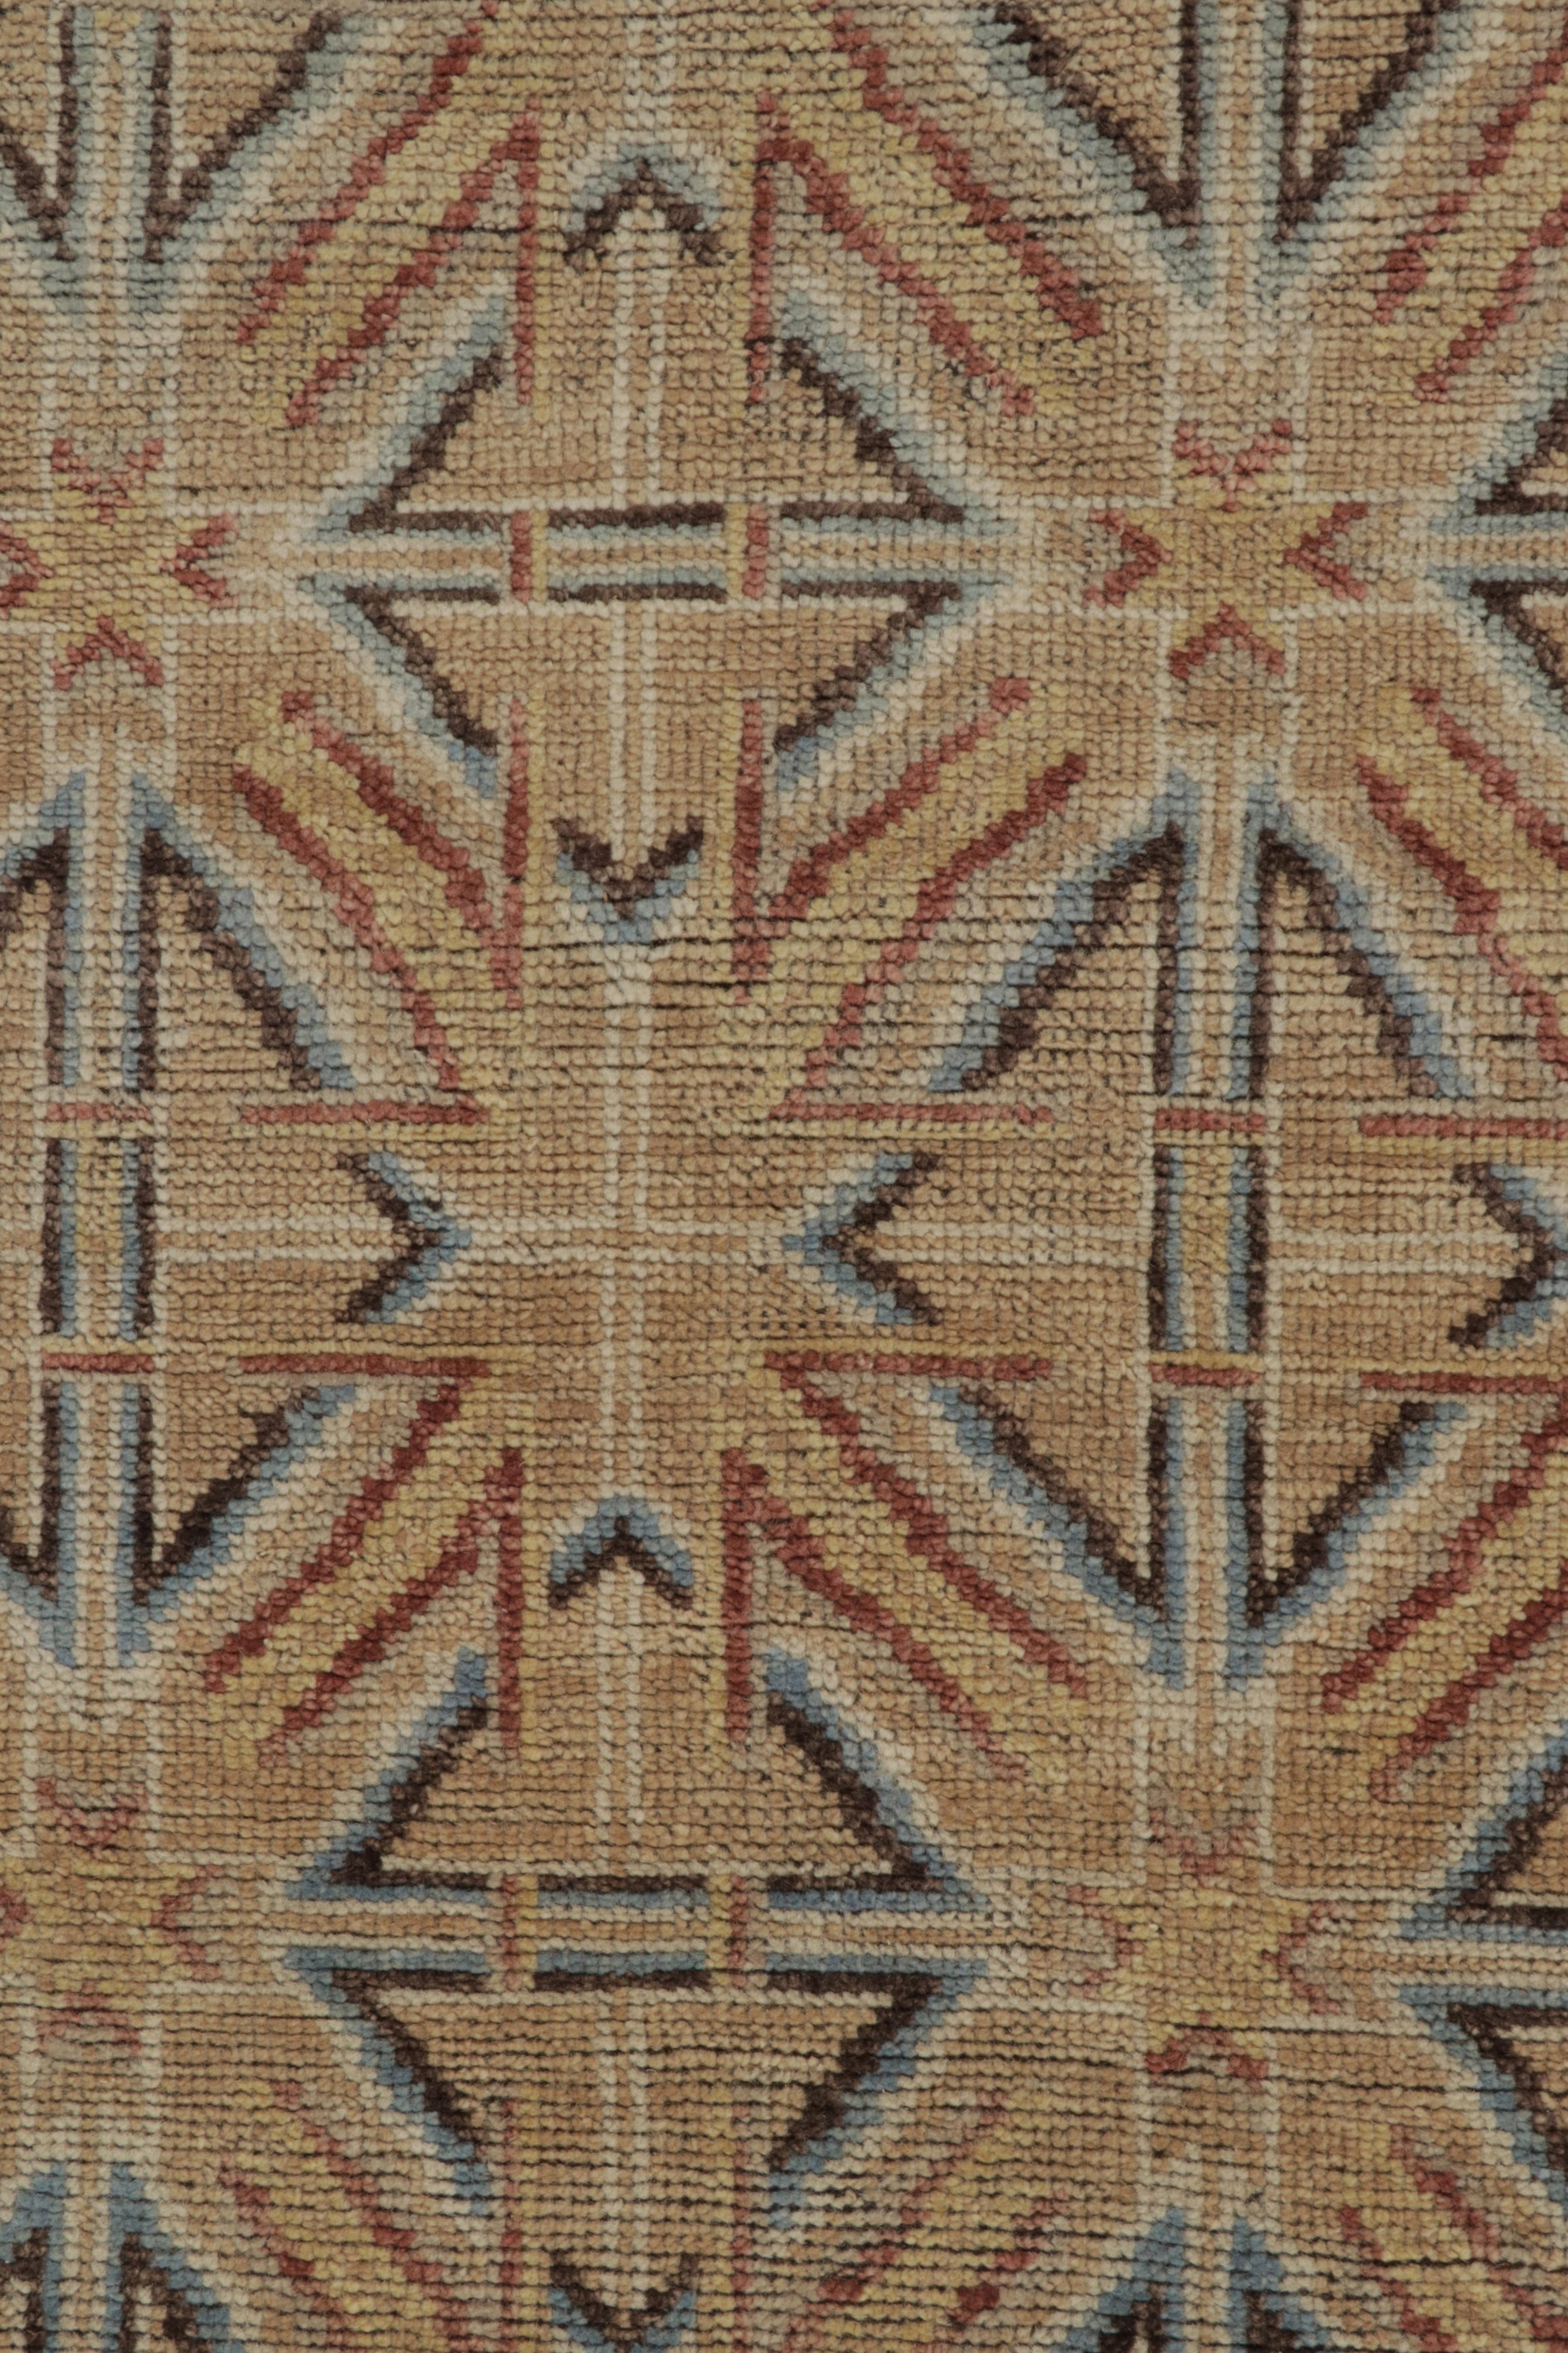 Contemporary Rug & Kilim’s Chinese Dynastic Style Square Rug in Beige-Brown and Blue Patterns For Sale